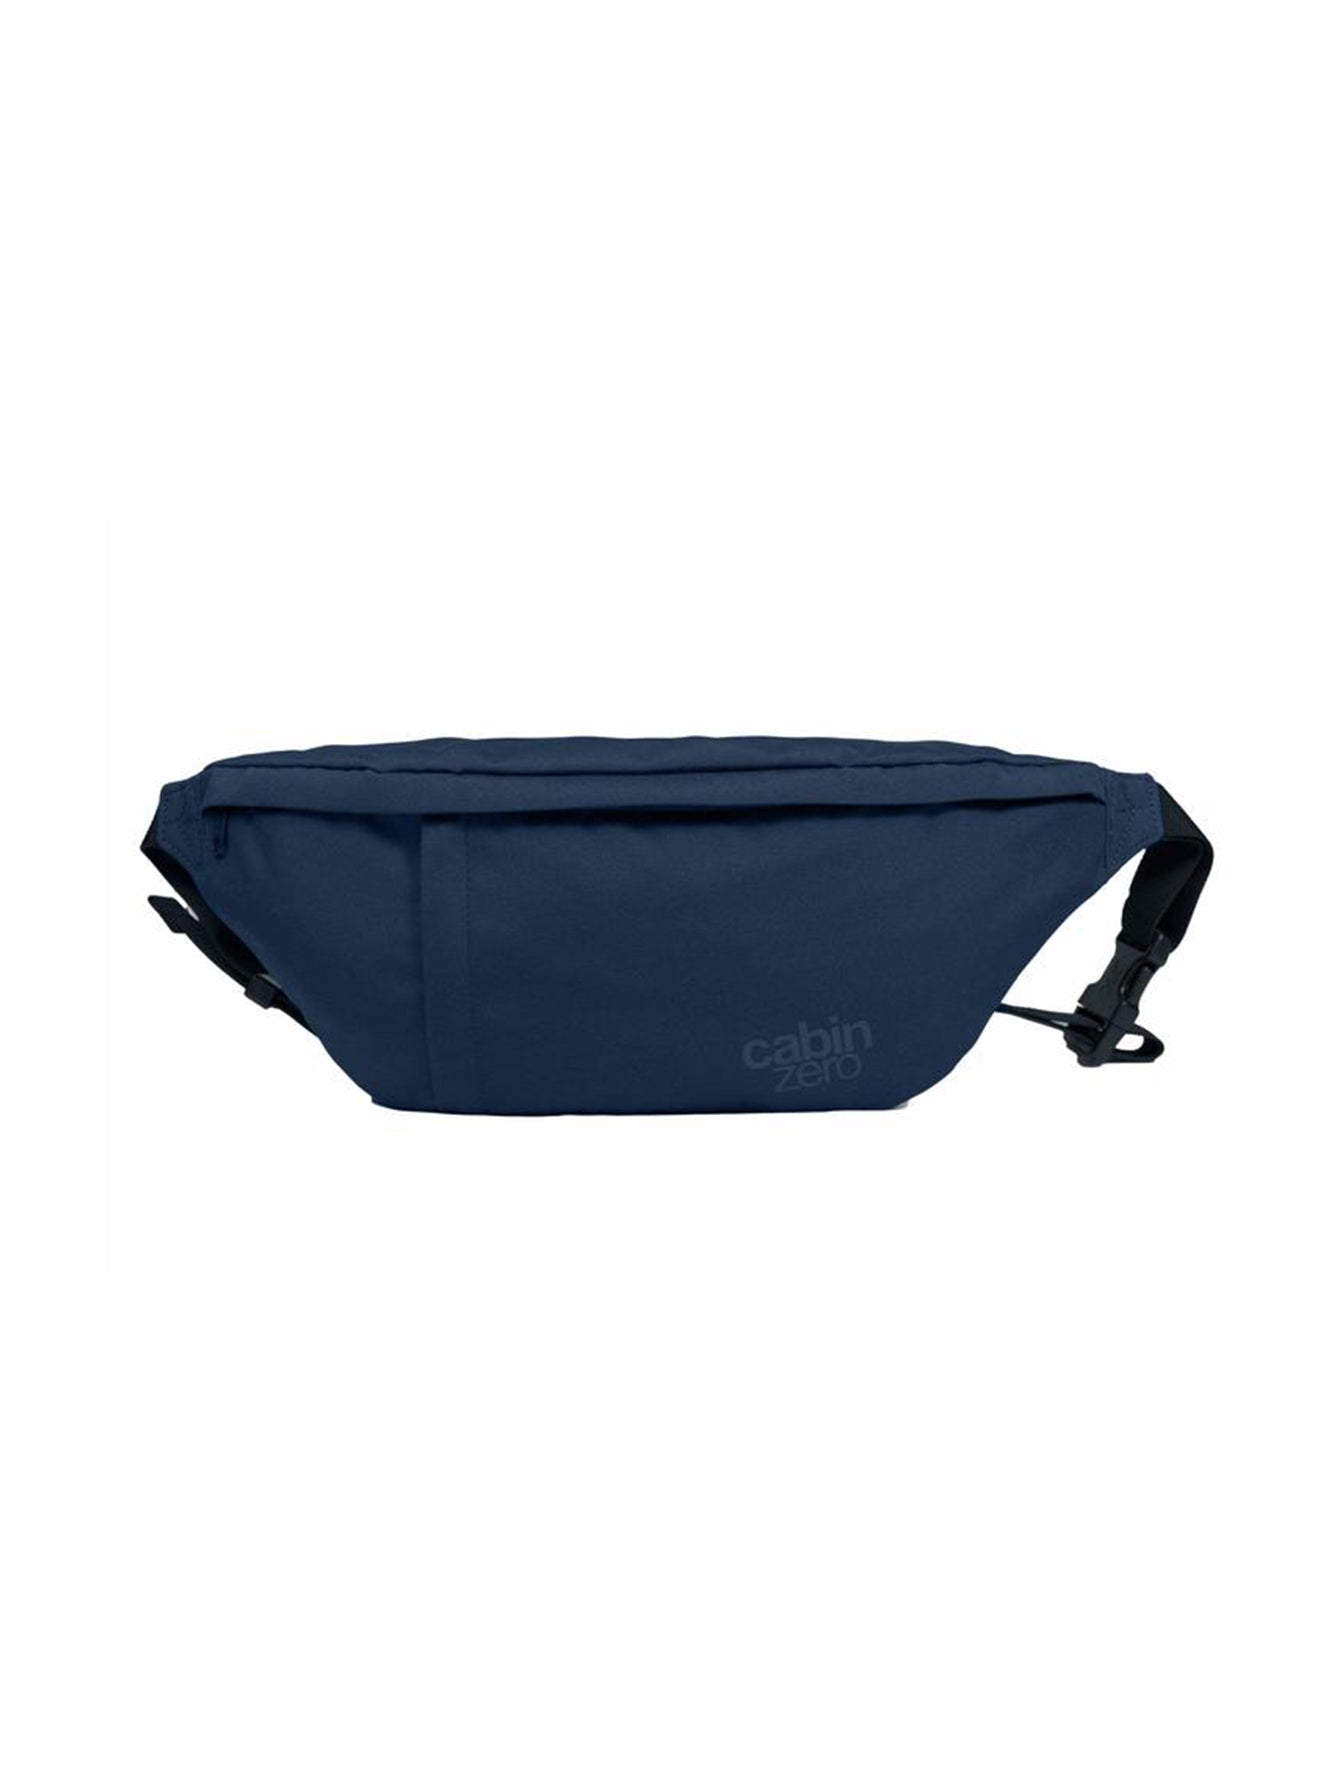 Cabinzero Hip Pack 2L in Navy Color